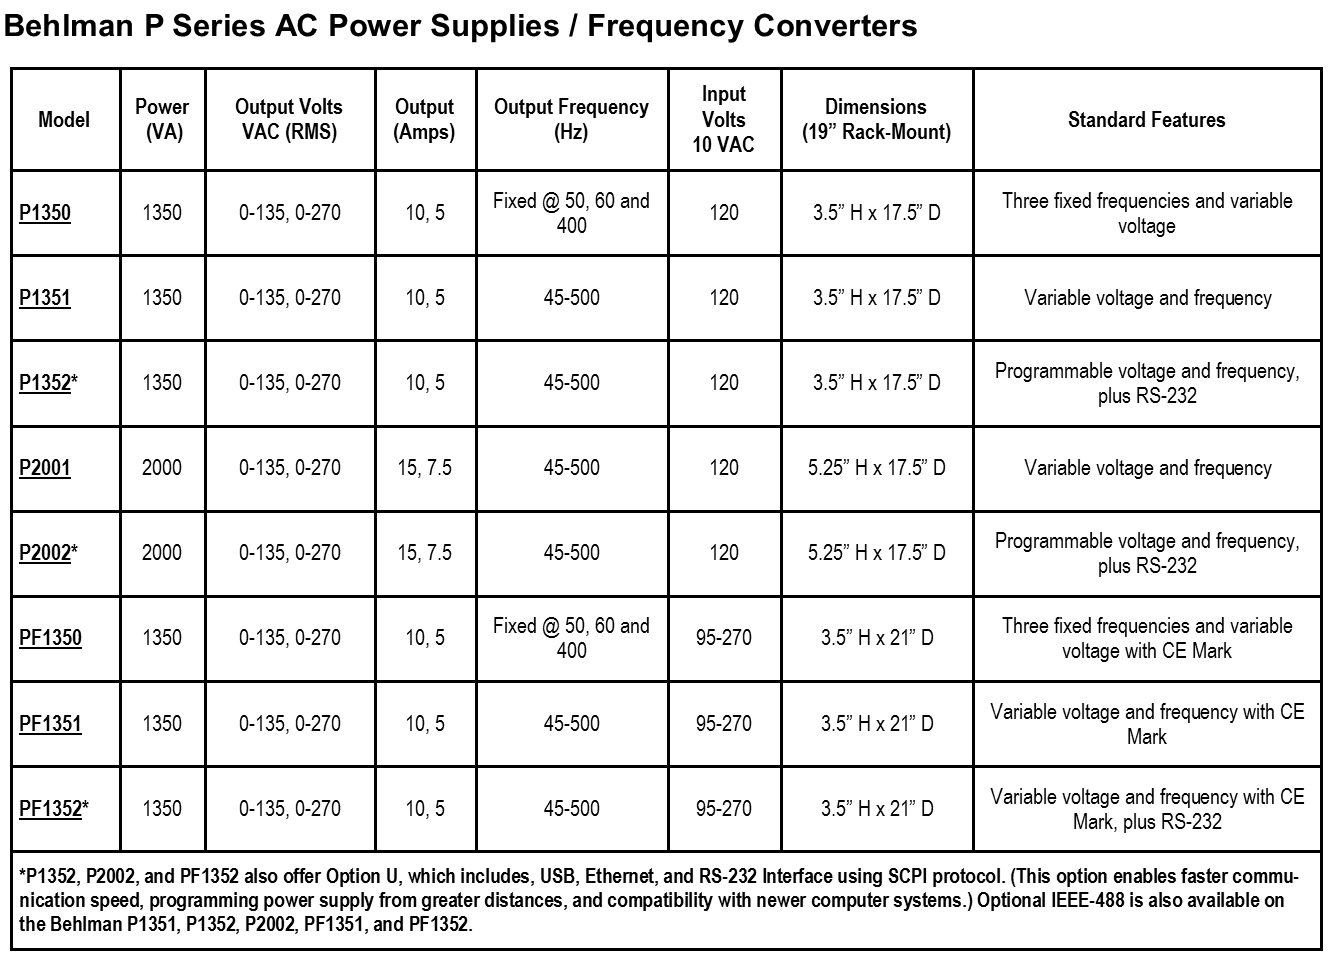 Compare all Behlman P-Series AC Power Sources to find those best suited for your applications.